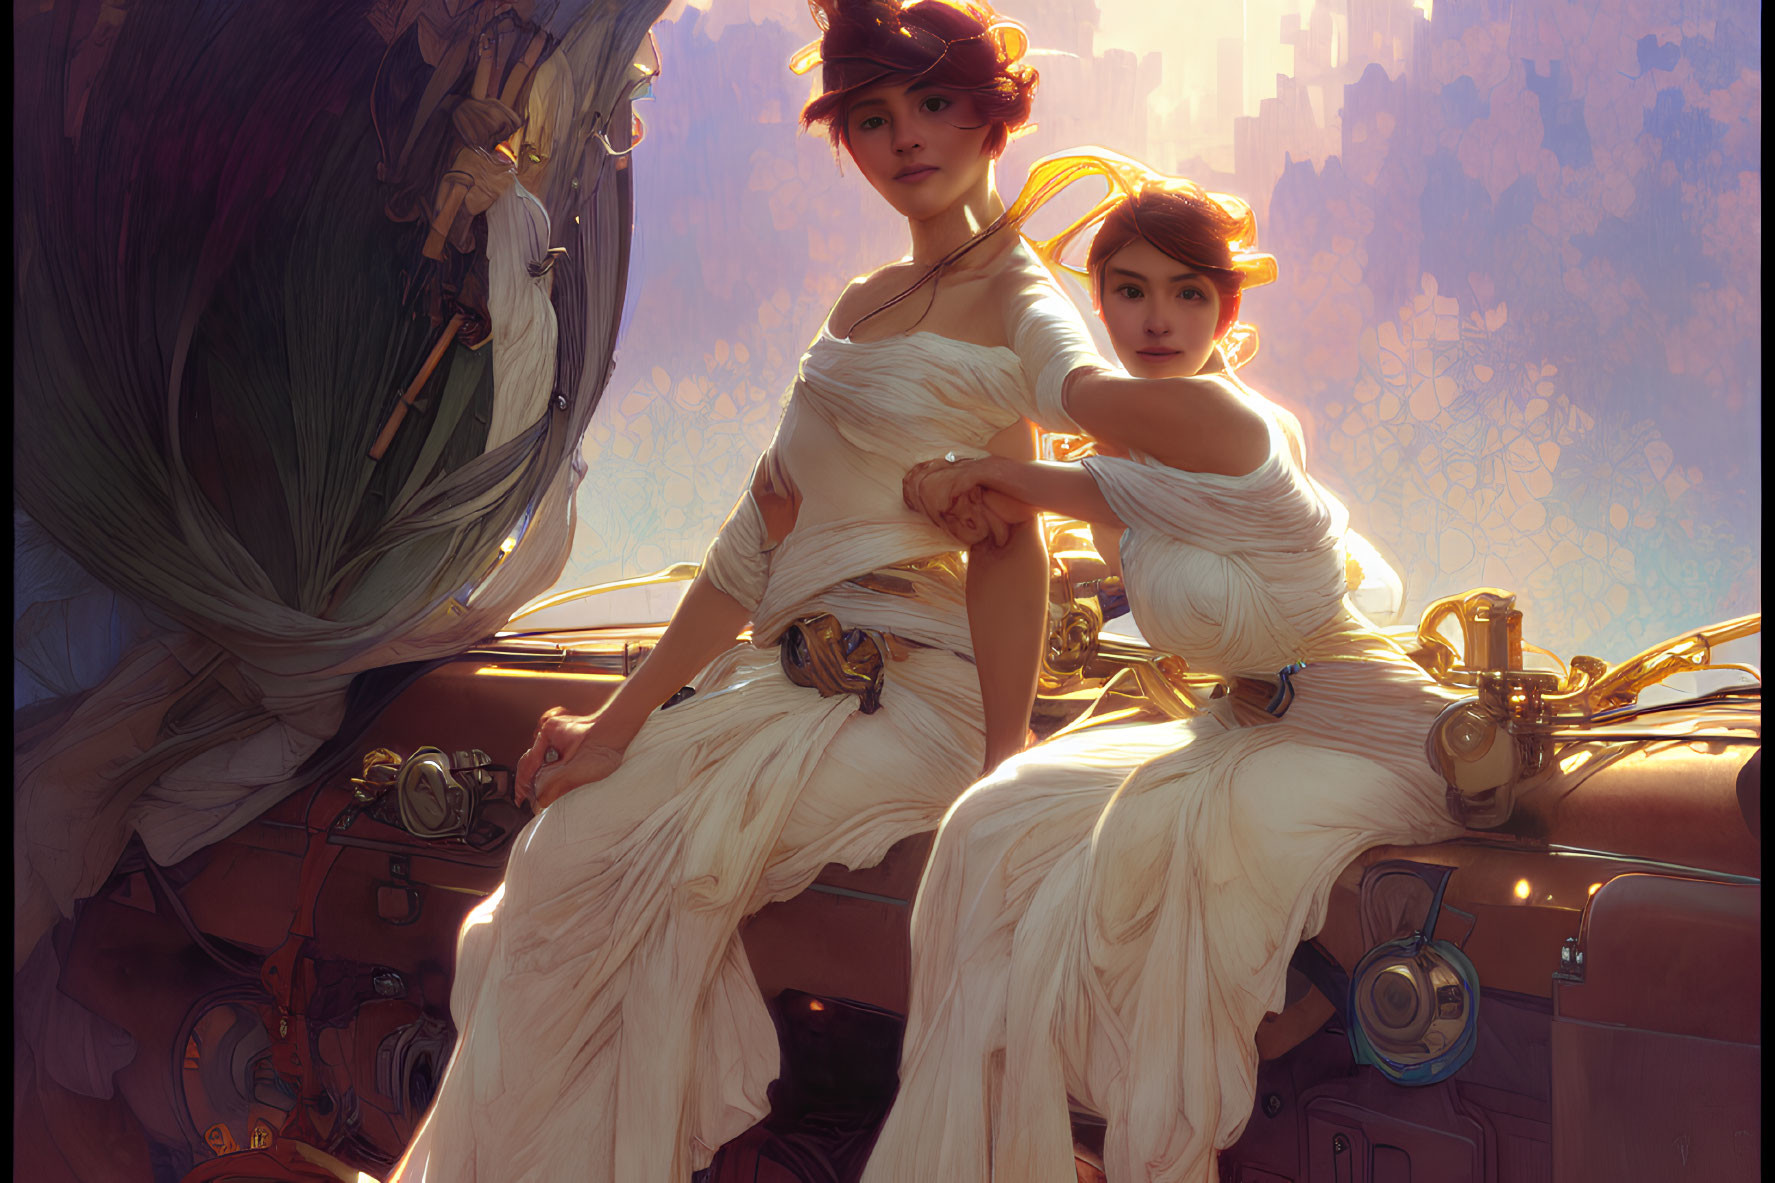 Two women in white dresses on steampunk airship with golden accessories.